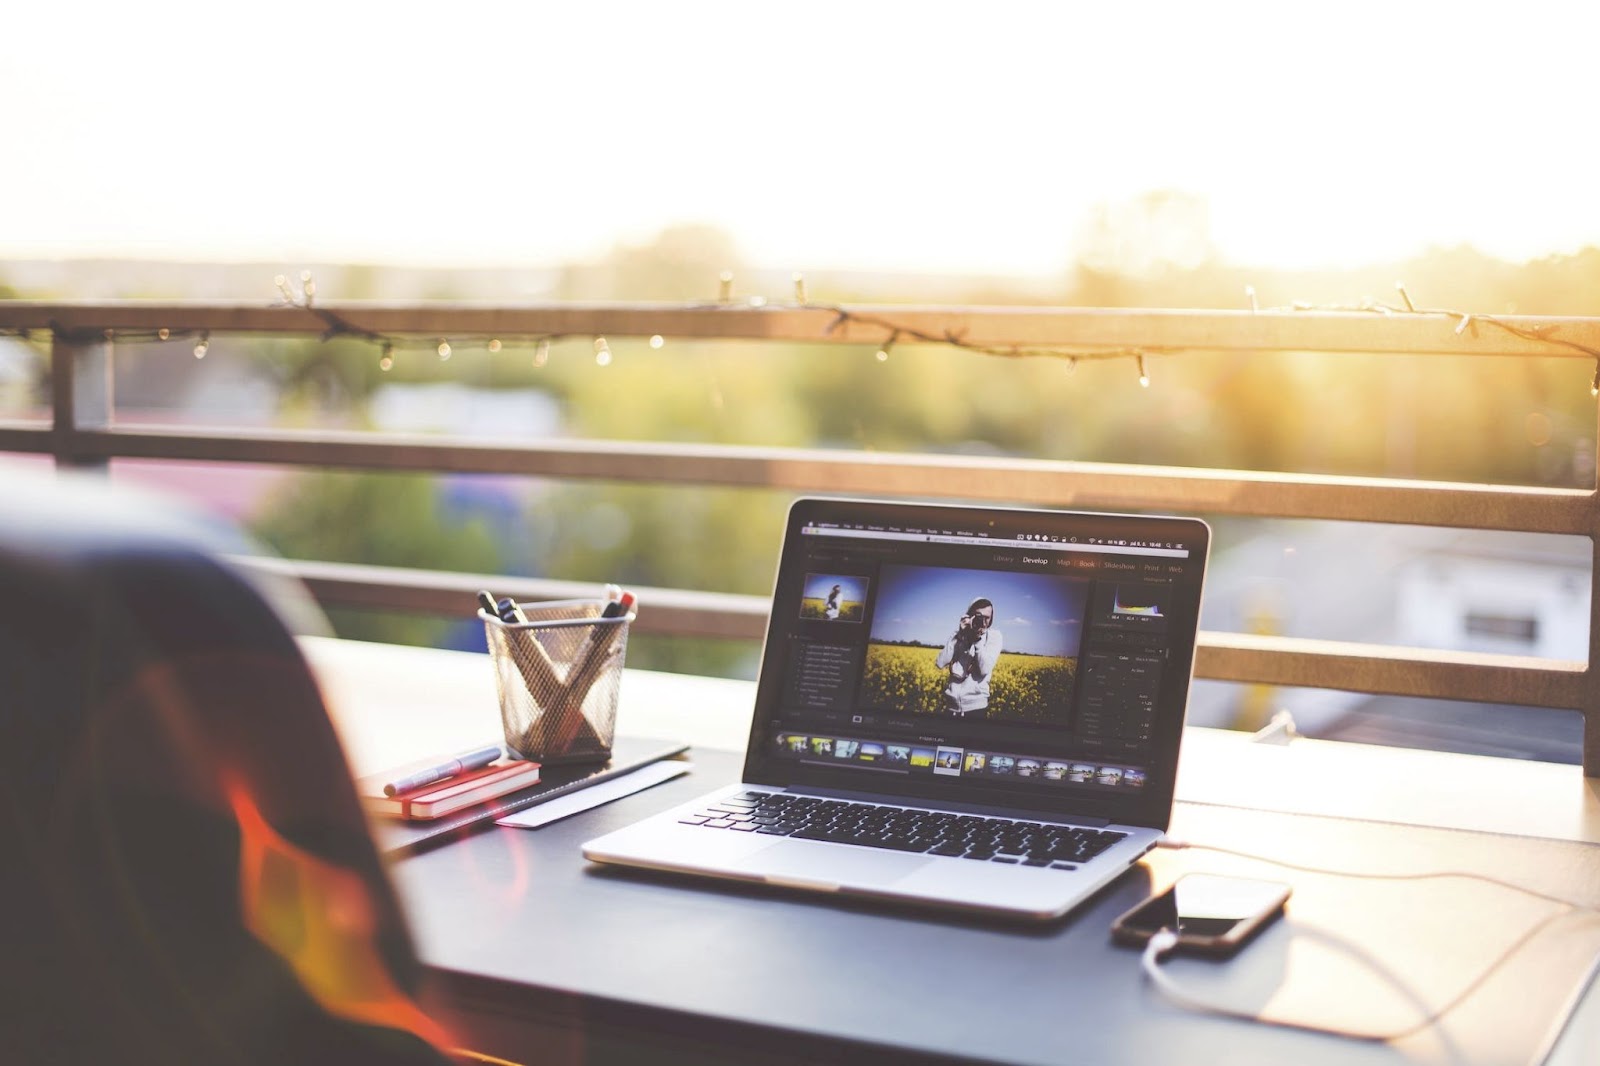 How to Edit Your Photos With Free Online Tools: 4 Tips for Getting Started